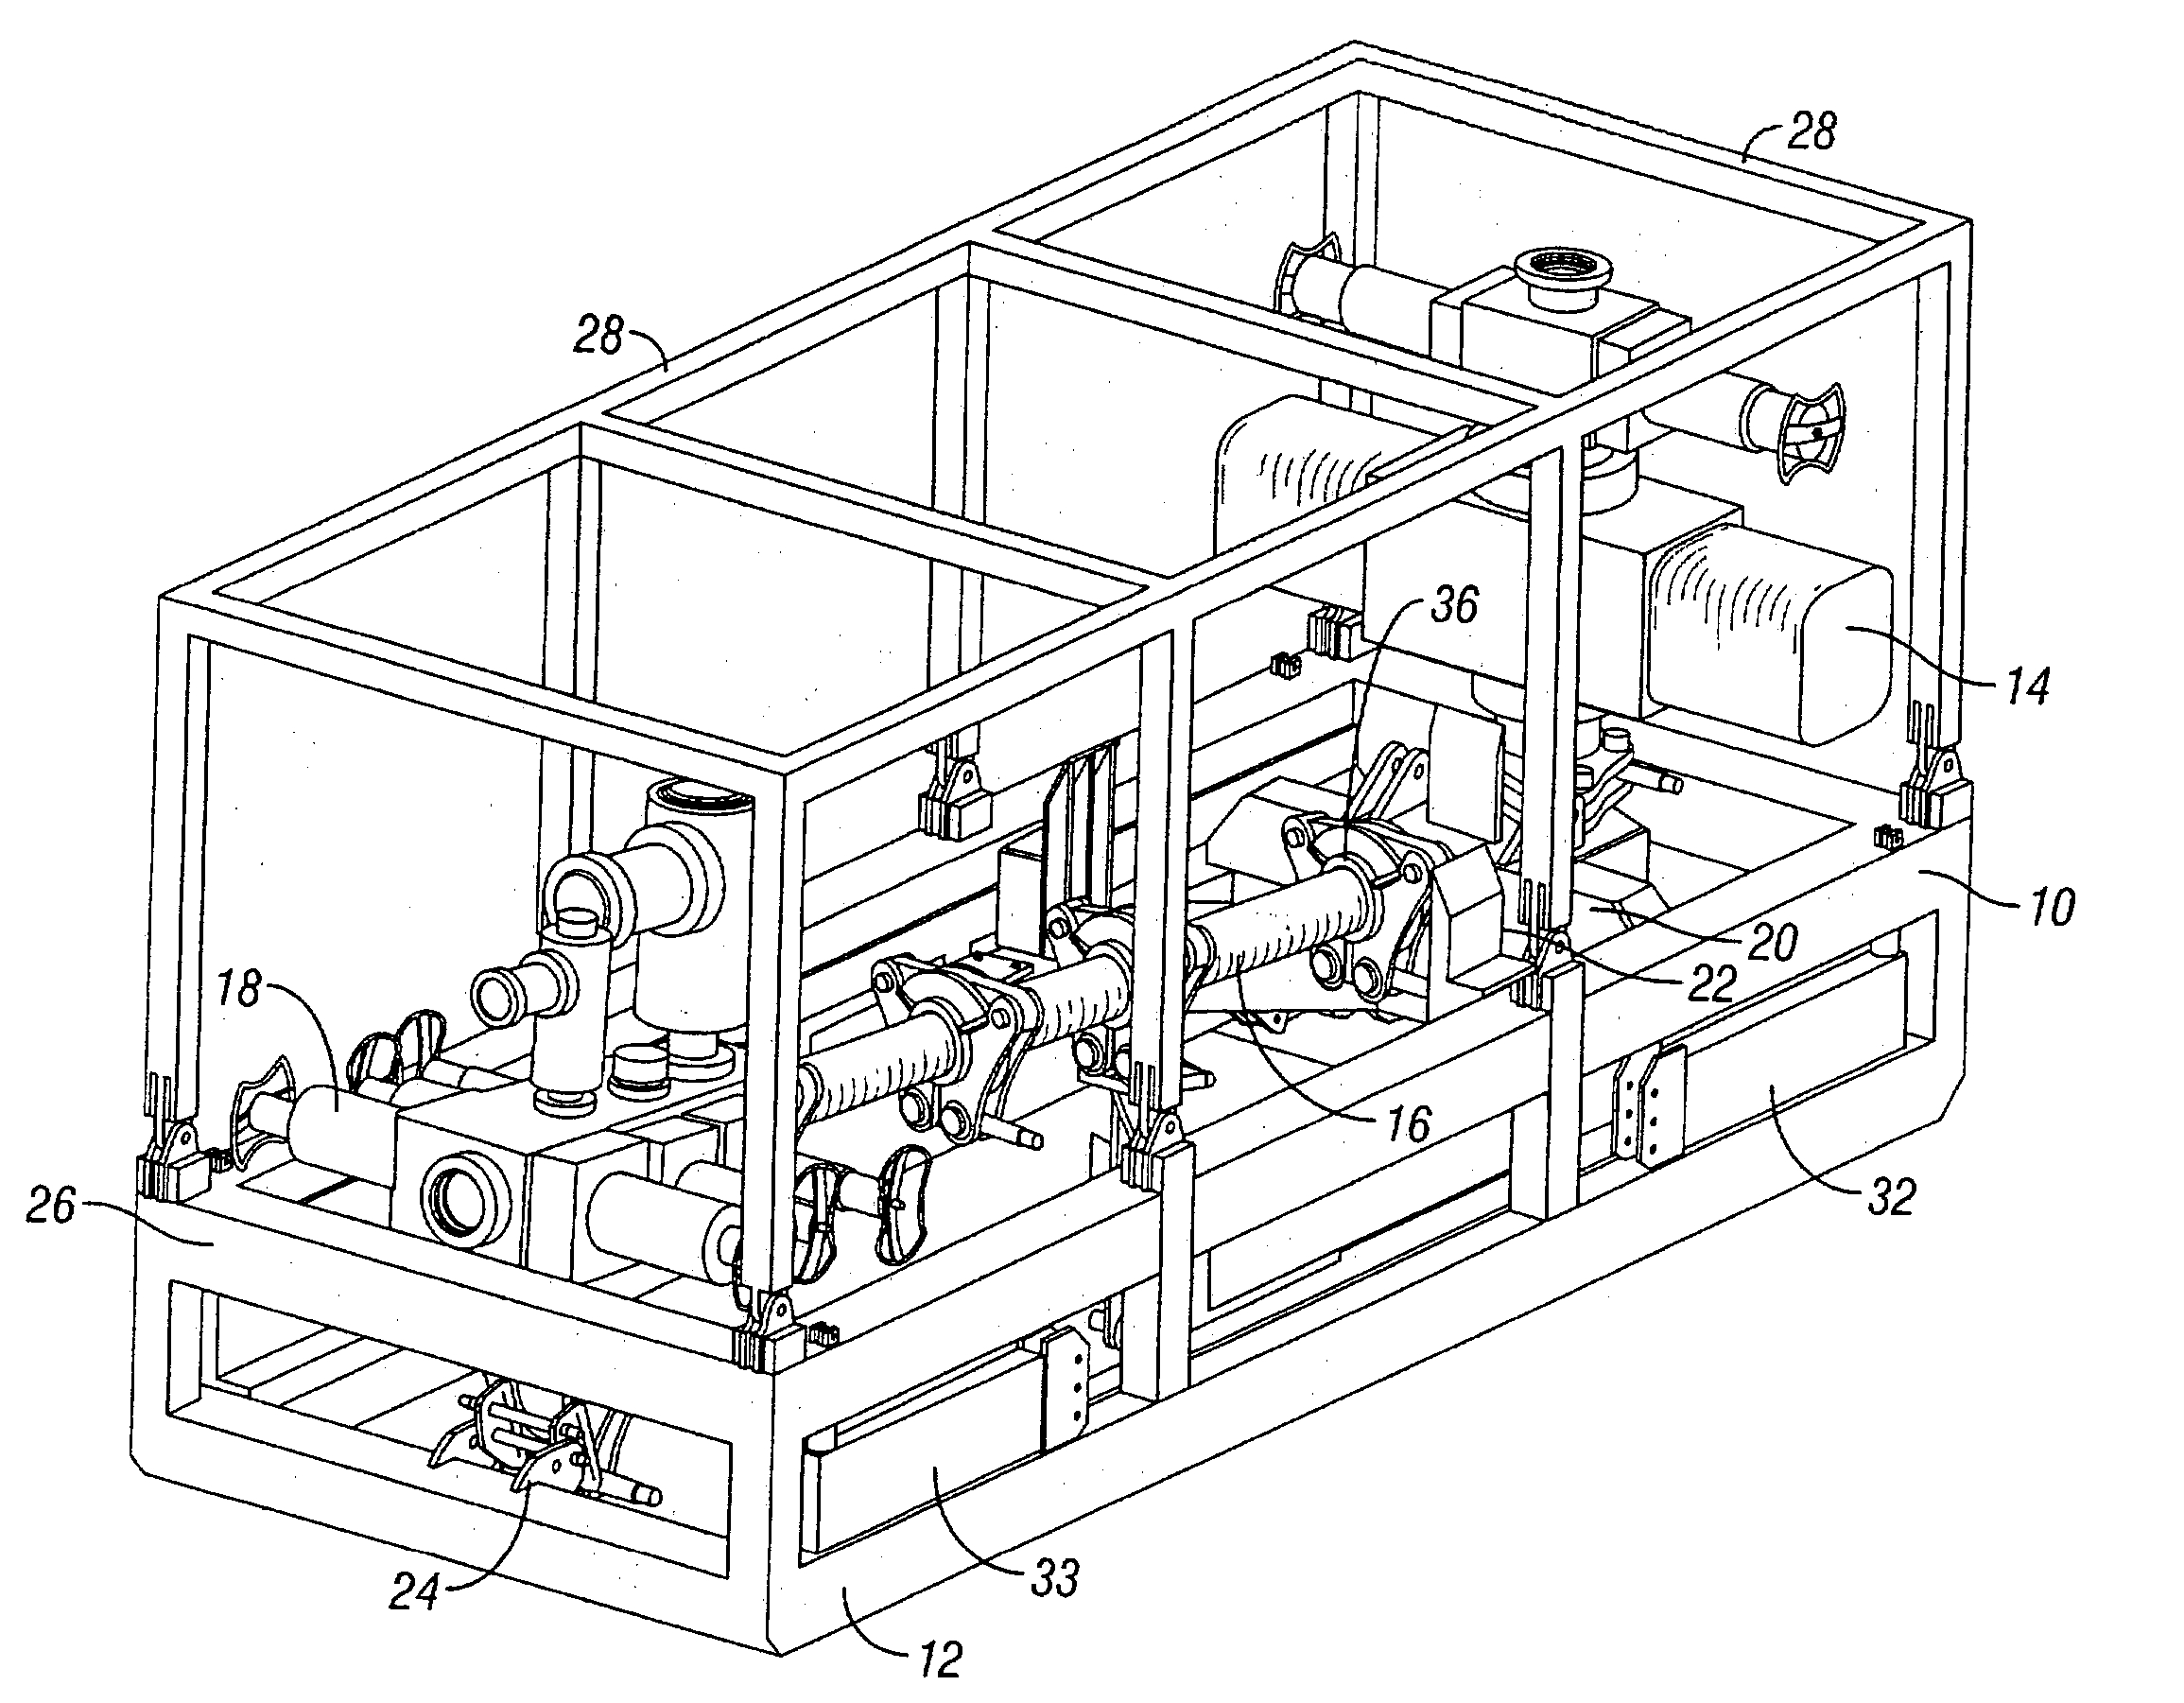 Jacking frame for coiled tubing operations